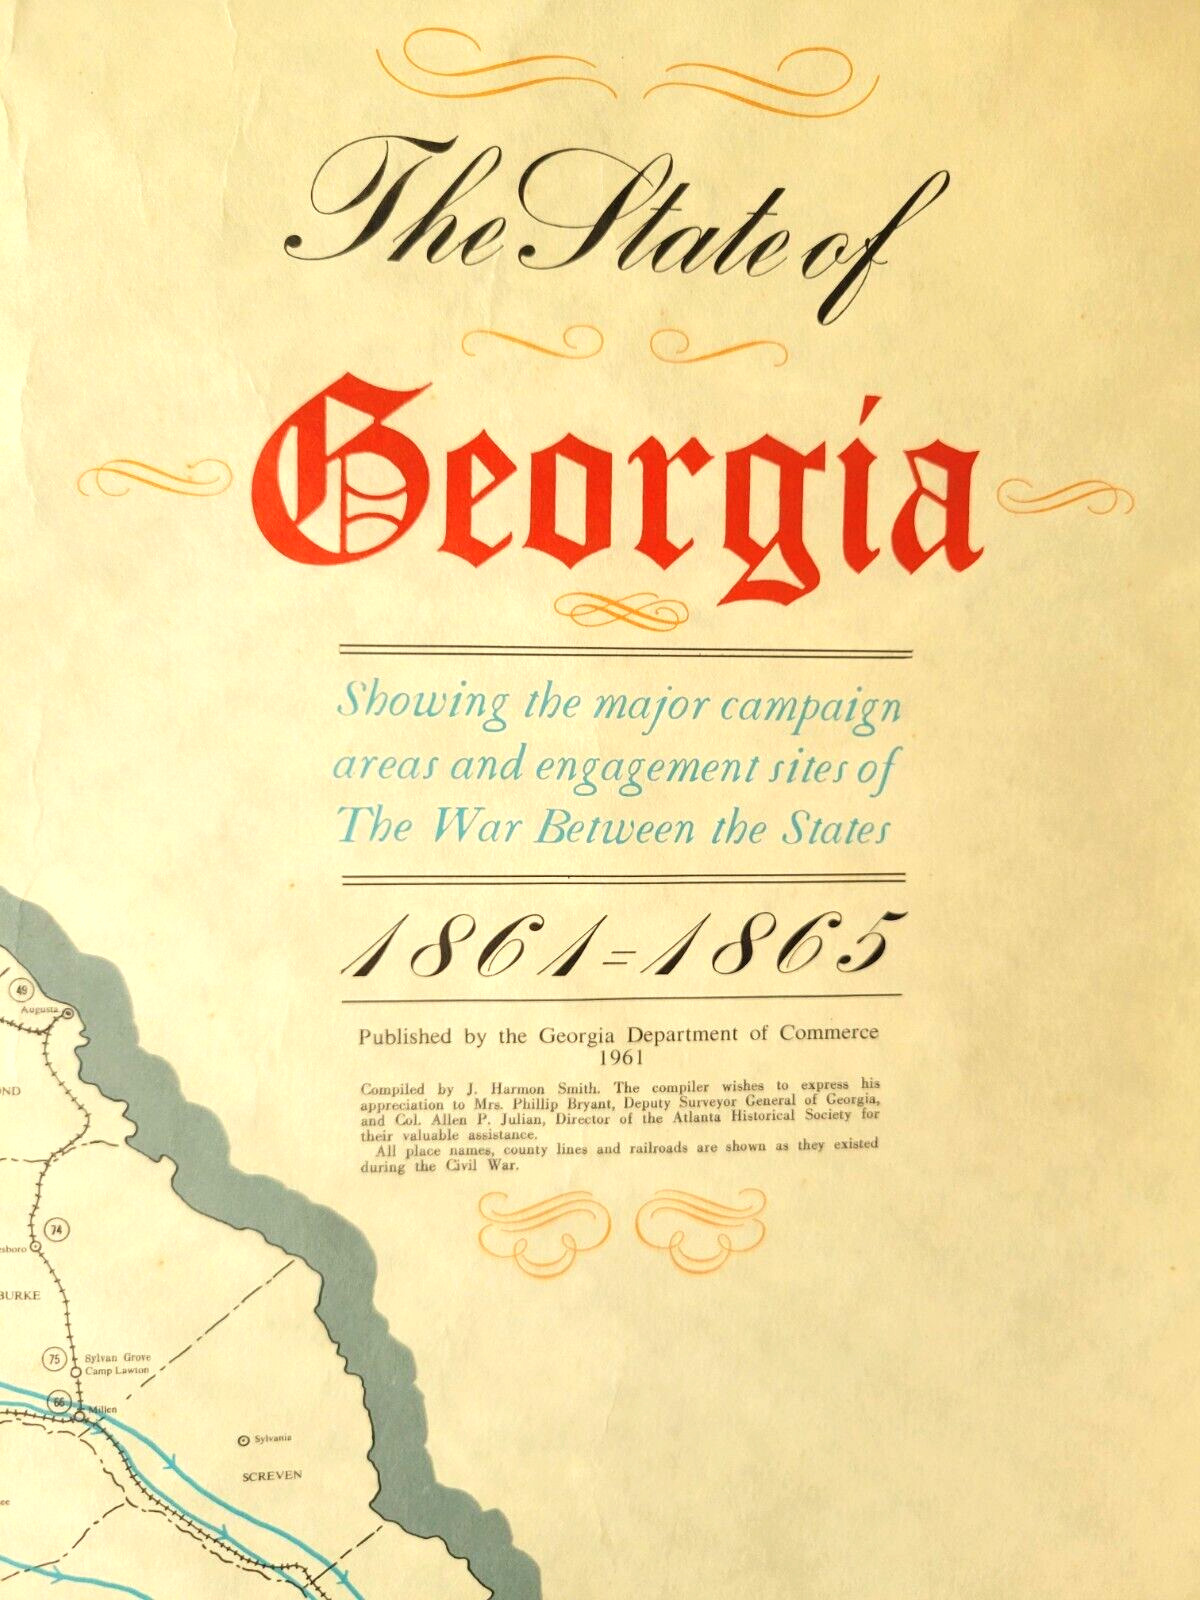 1961 Civil War Map of Battles 1861-1865 by The Georgia Department of Commerce